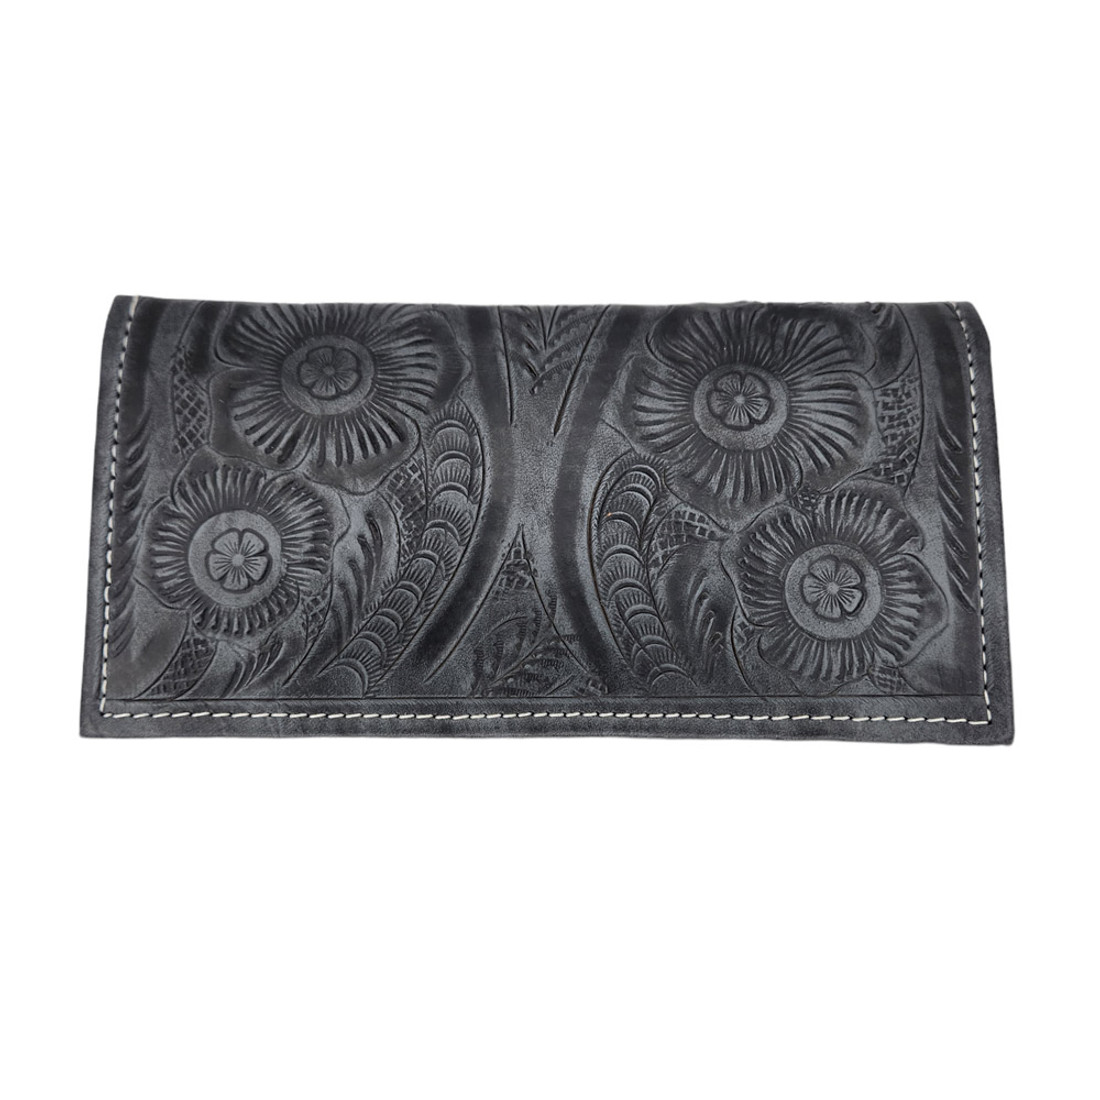 Floral design of Leaders in Leather charcoal gray wallet. 